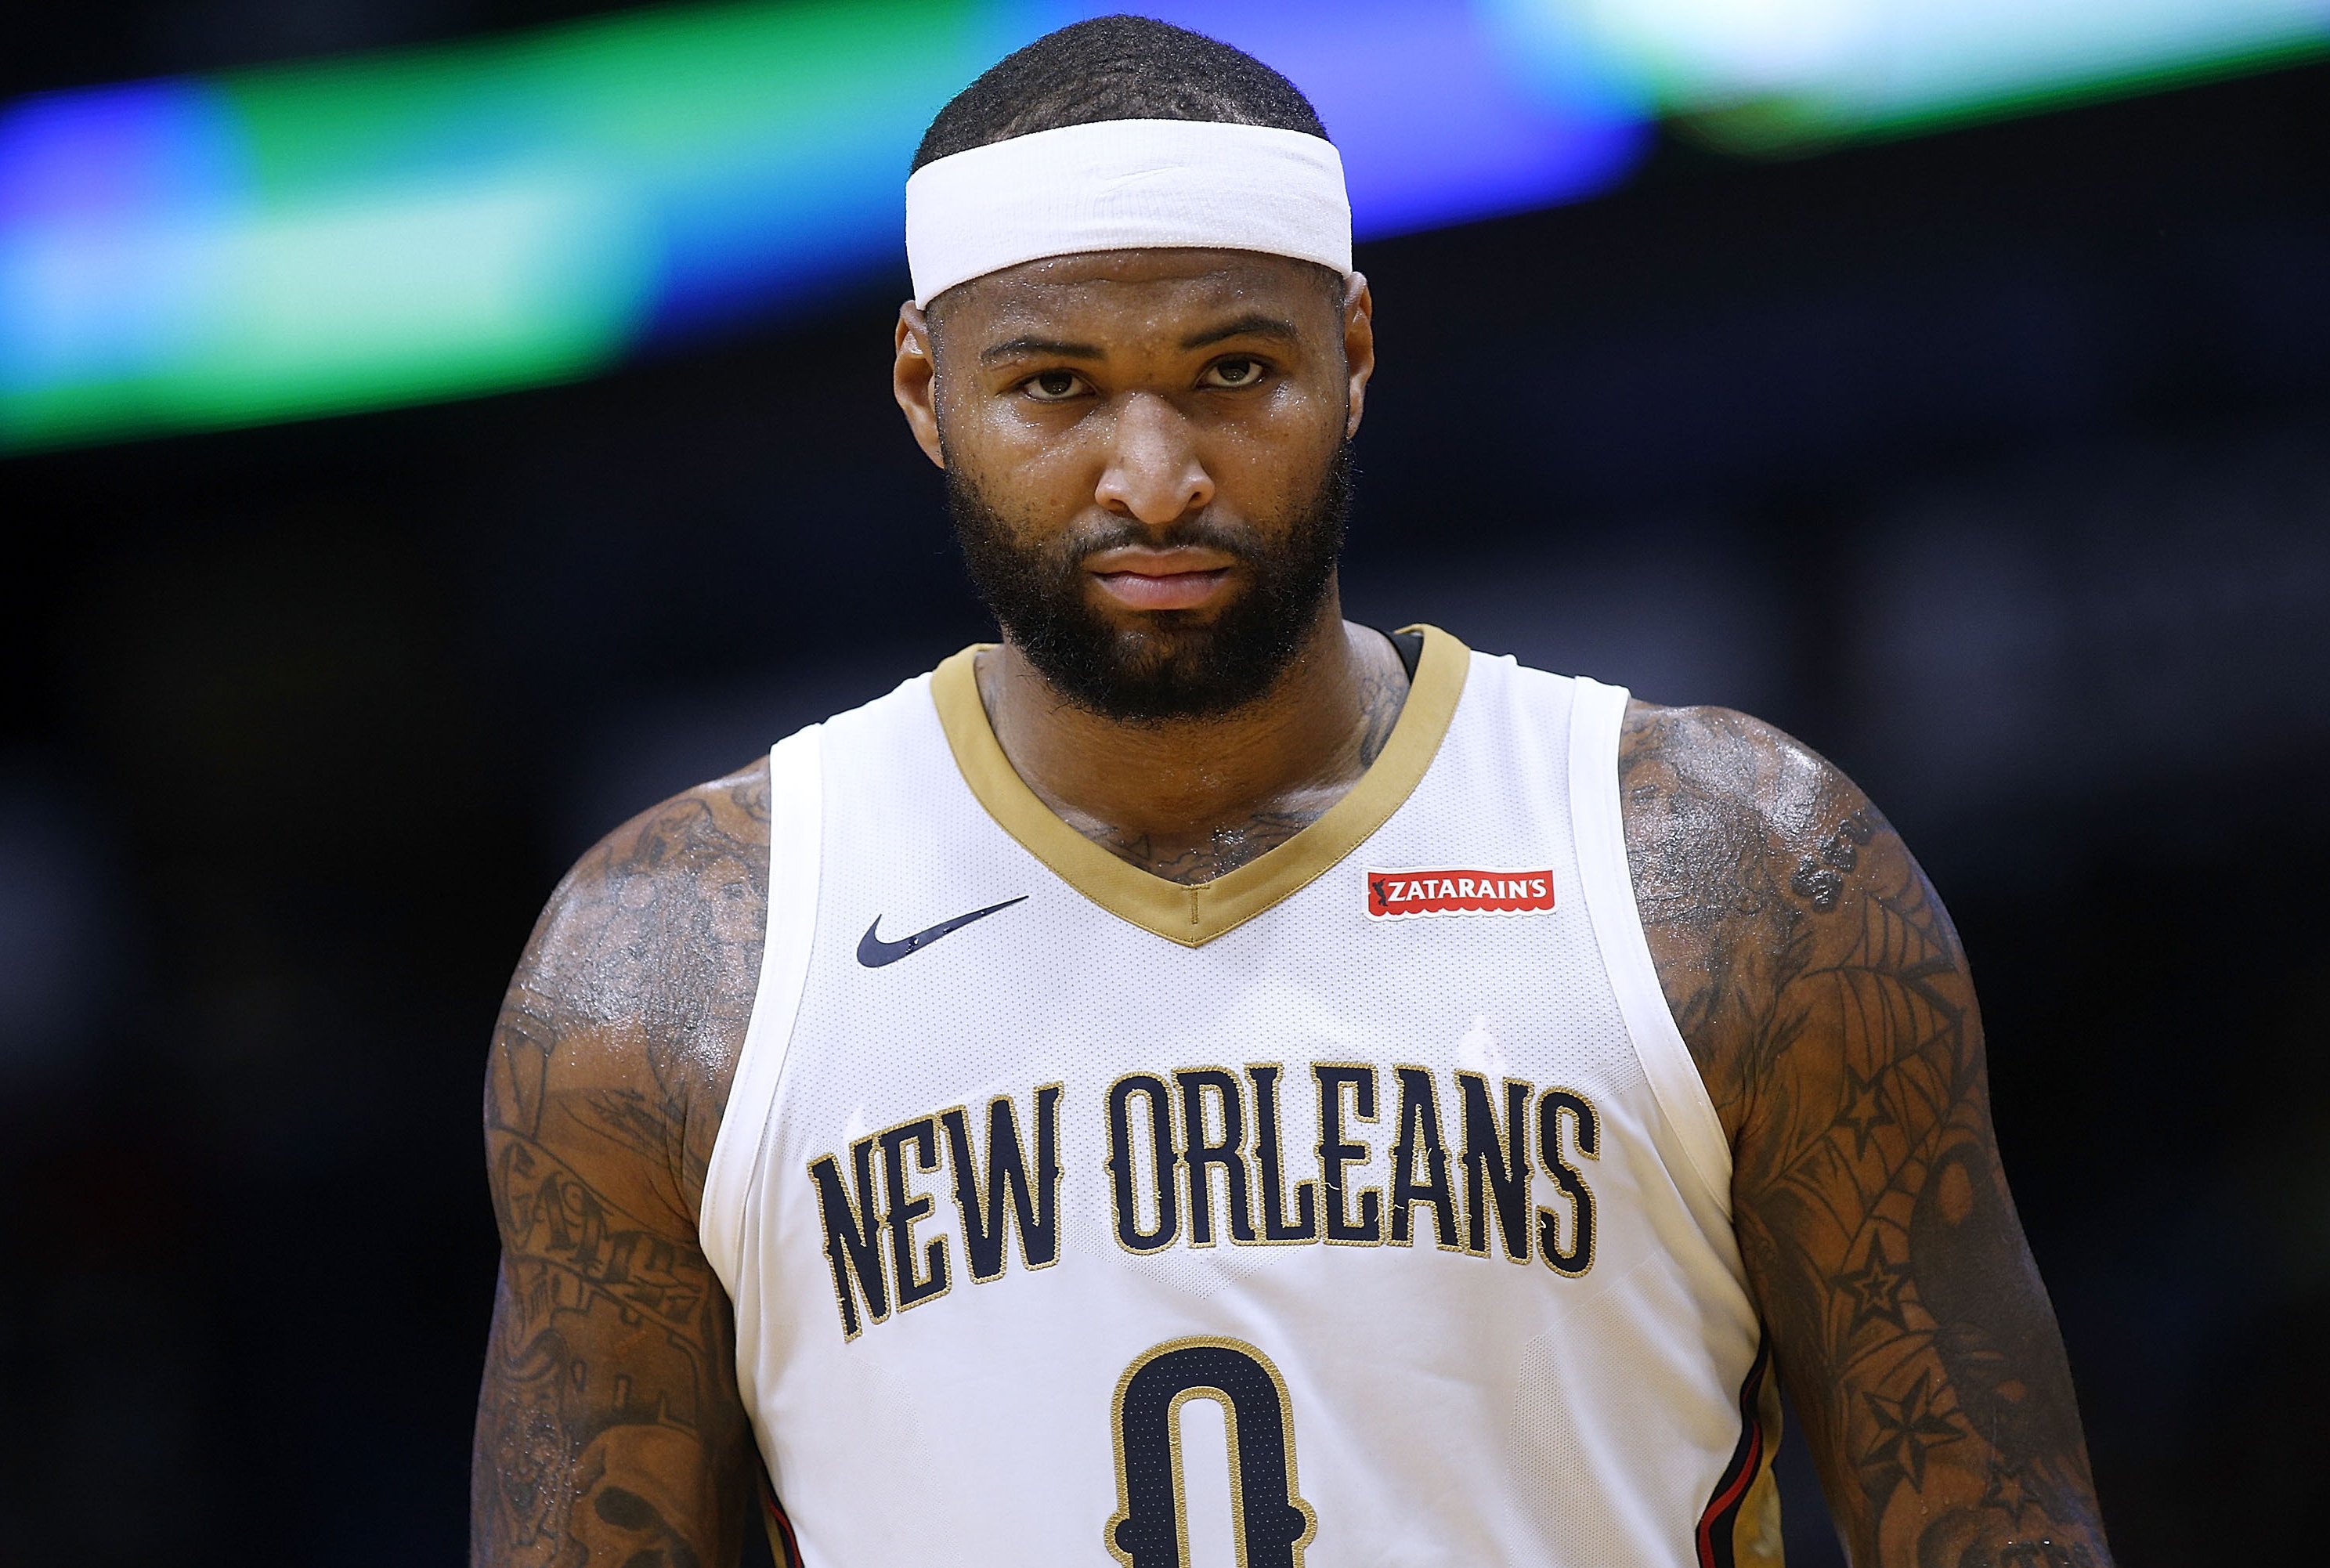 DeMarcus Cousins clears waivers after being released by Rockets, becomes  free agent, per report 